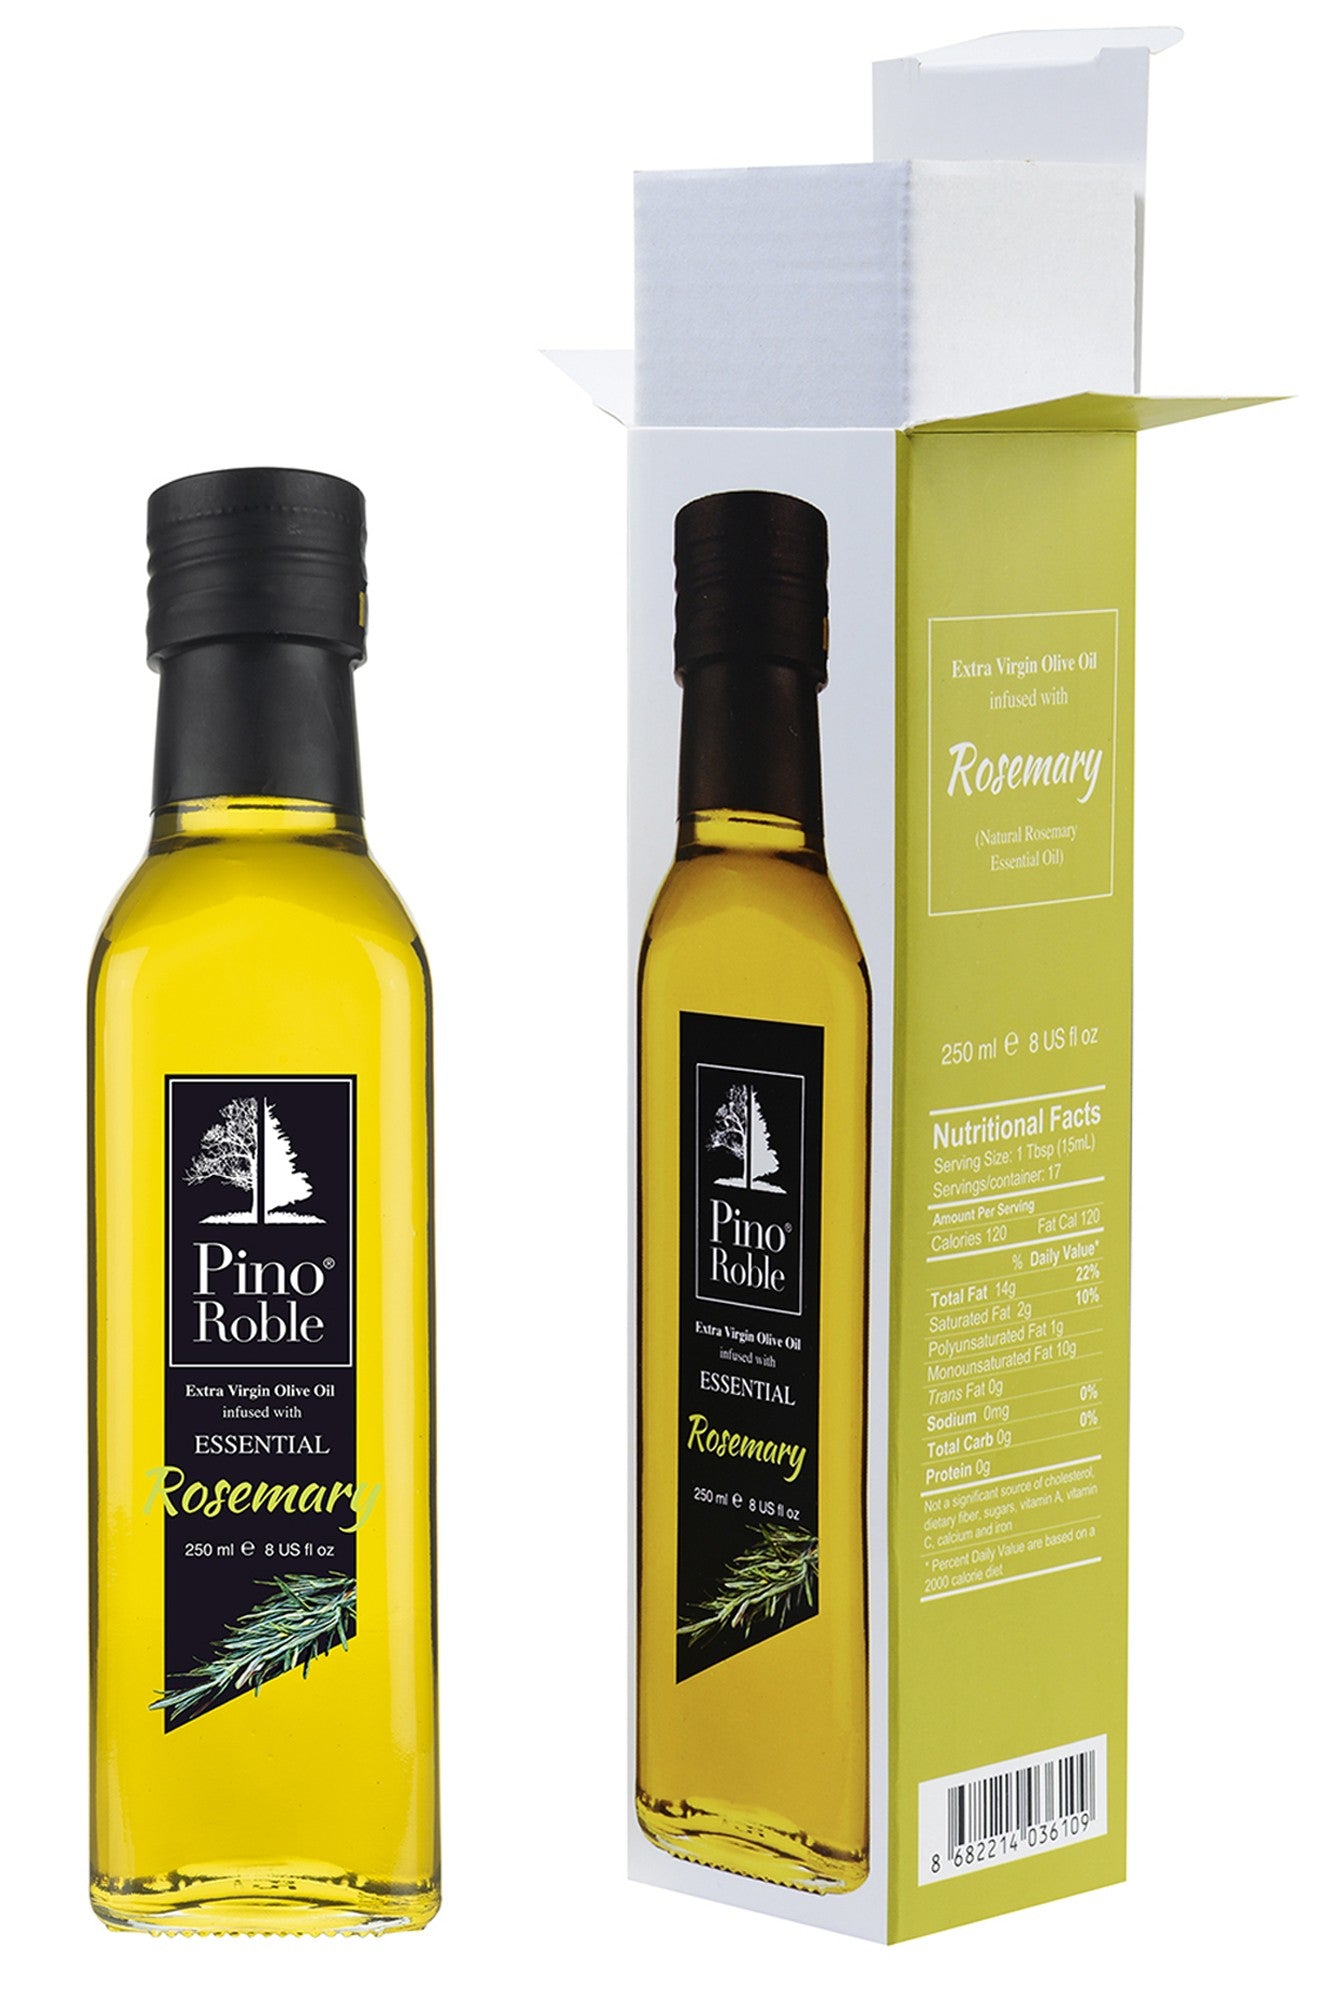 PinoRoble Extra Virgin Olive Oil Infused with Mediterranean Herbs 8 fl Oz